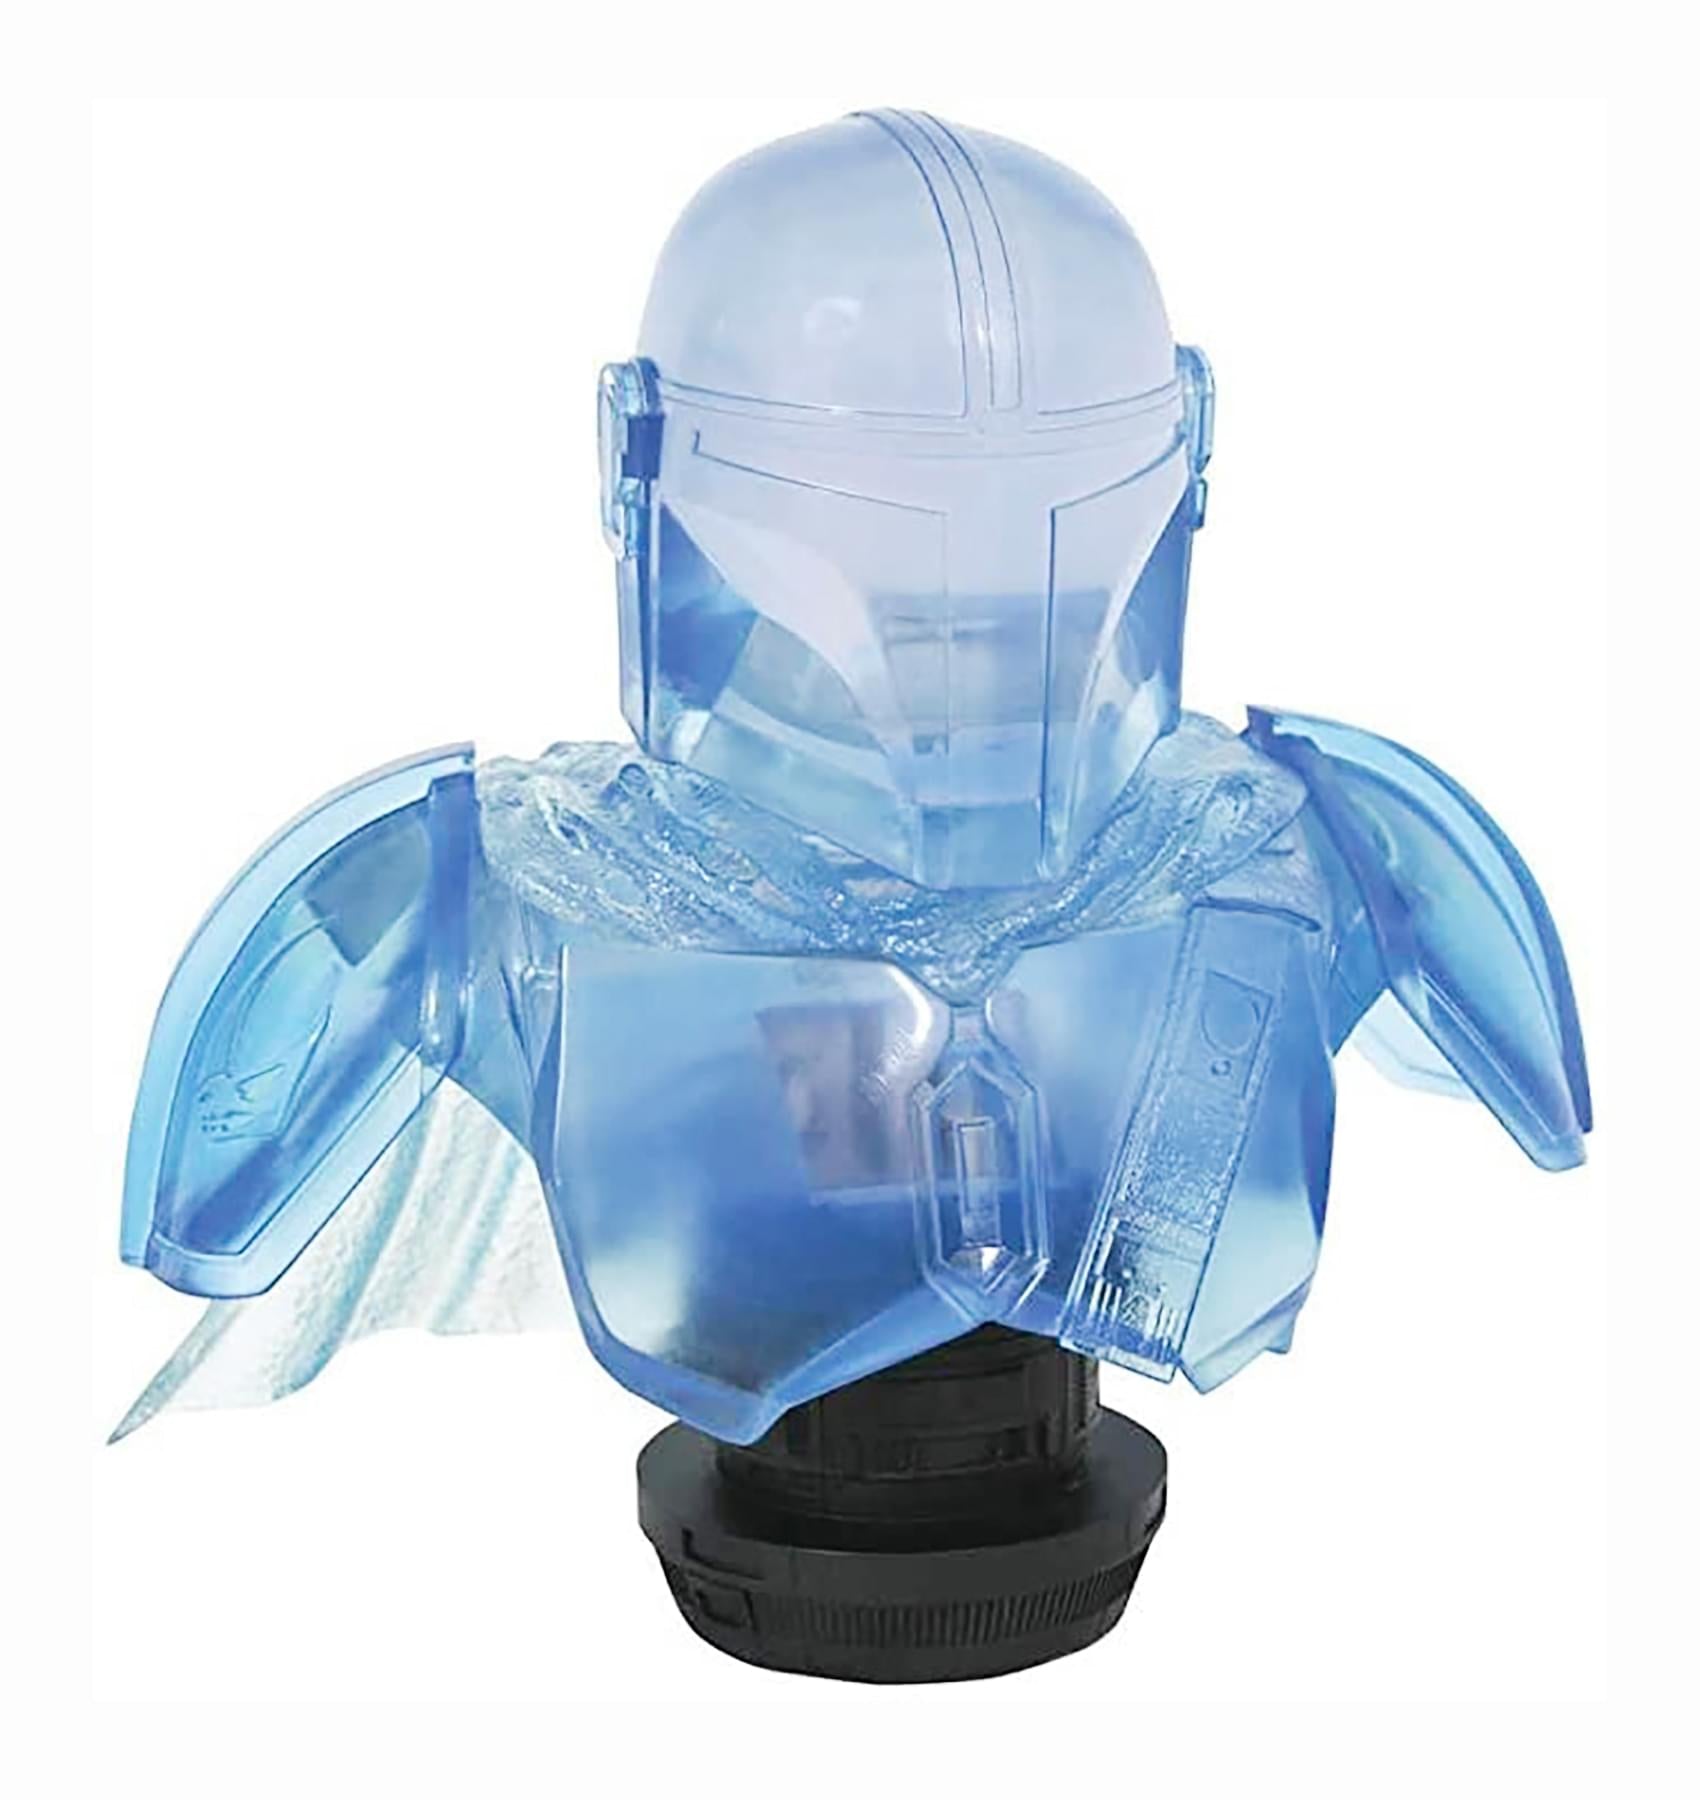 Star Wars The Mandalorian Limited Edition Light-Up 10-Inch Clear Resin Bust